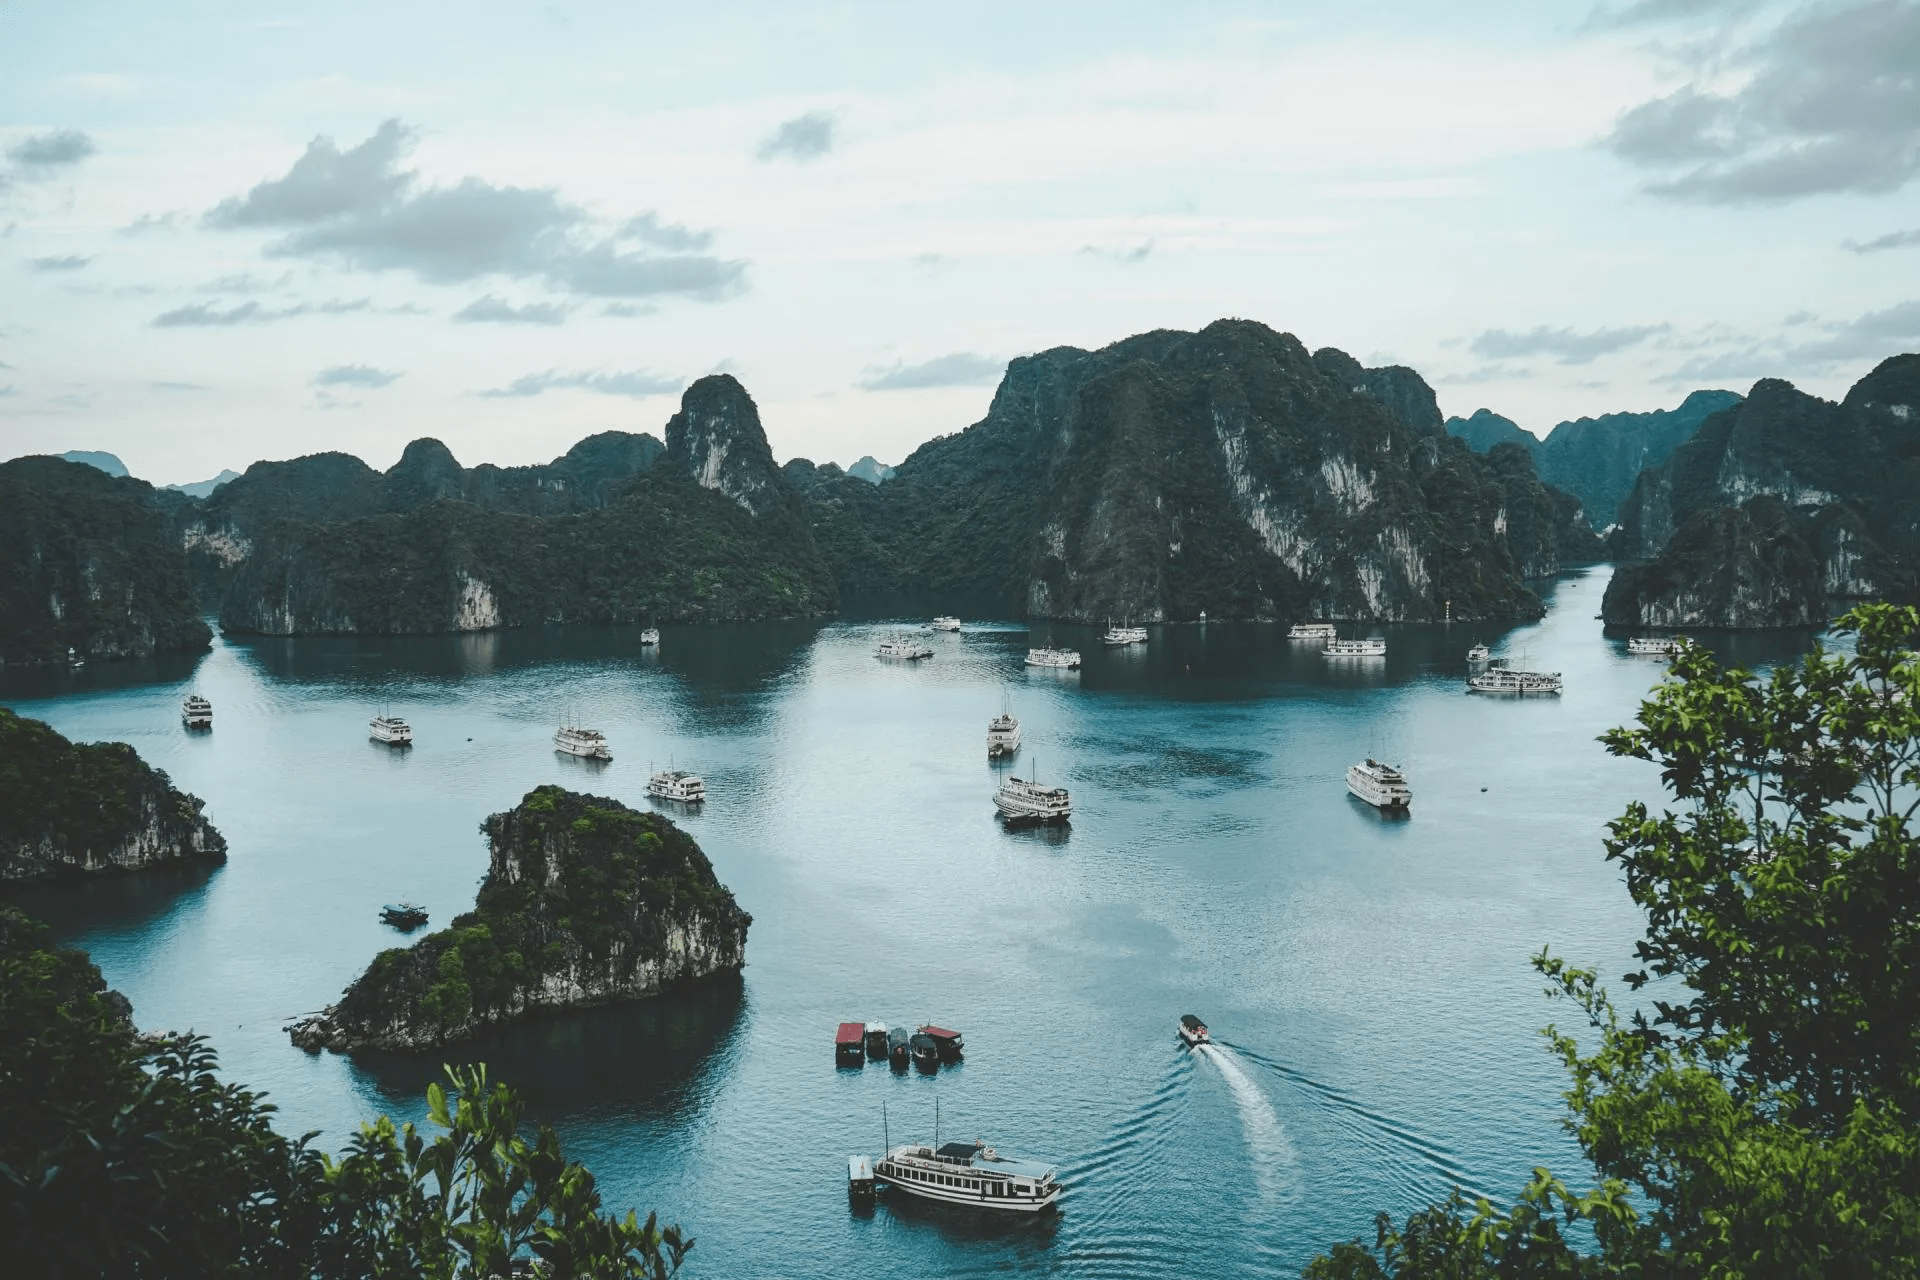 Halong Bay In Vietnam - Read on for my top 7 tips for Vietnam